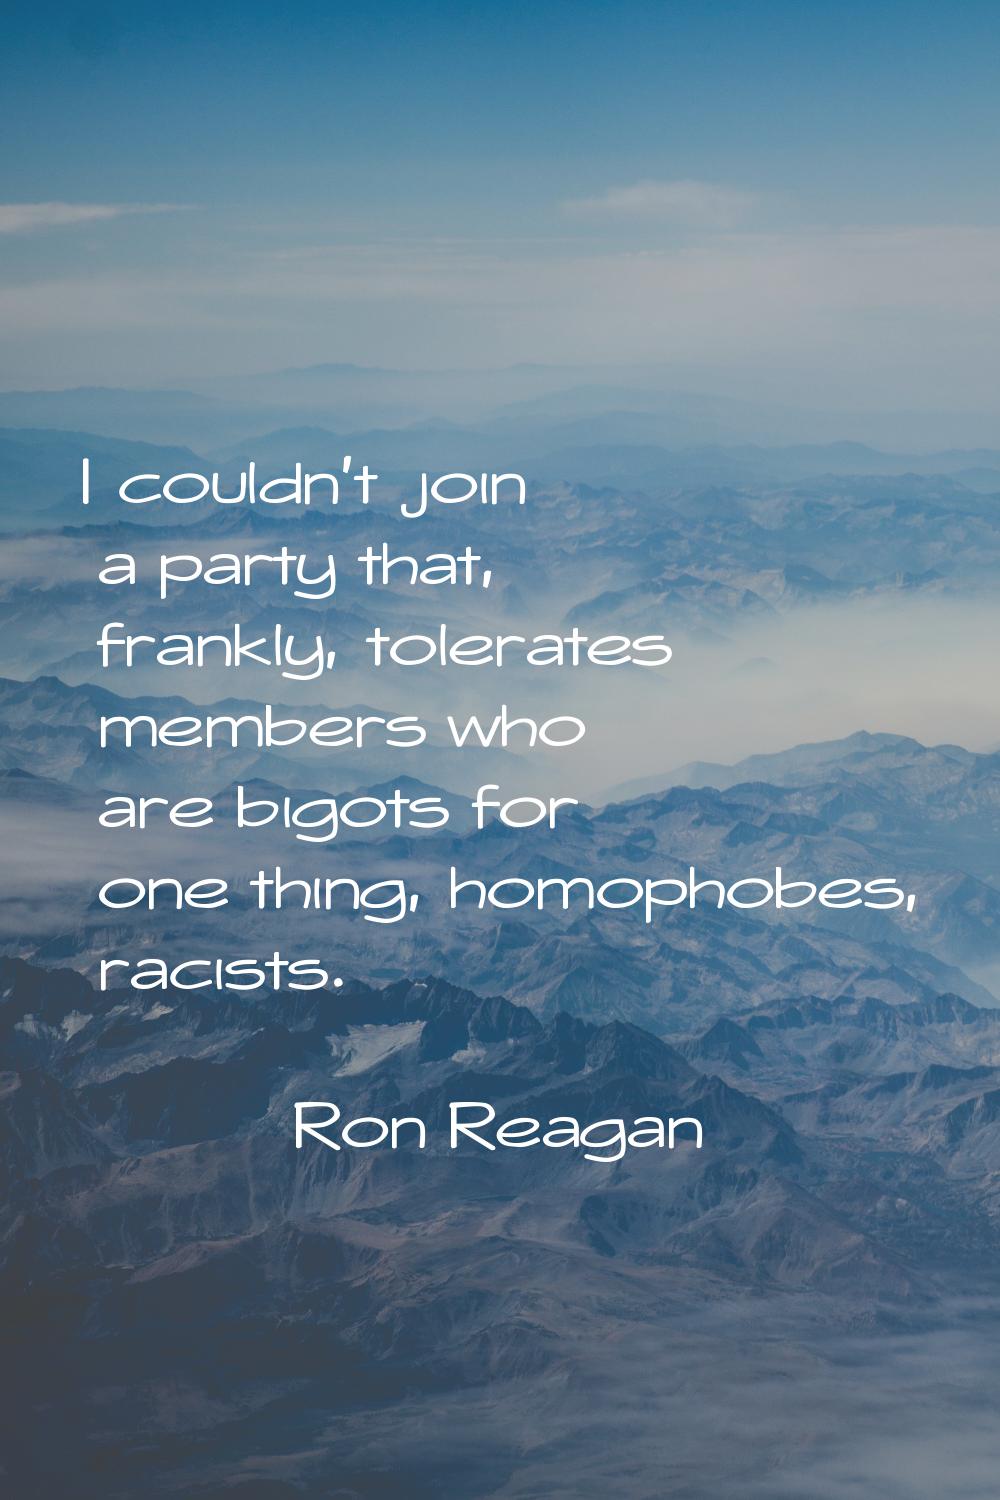 I couldn't join a party that, frankly, tolerates members who are bigots for one thing, homophobes, 